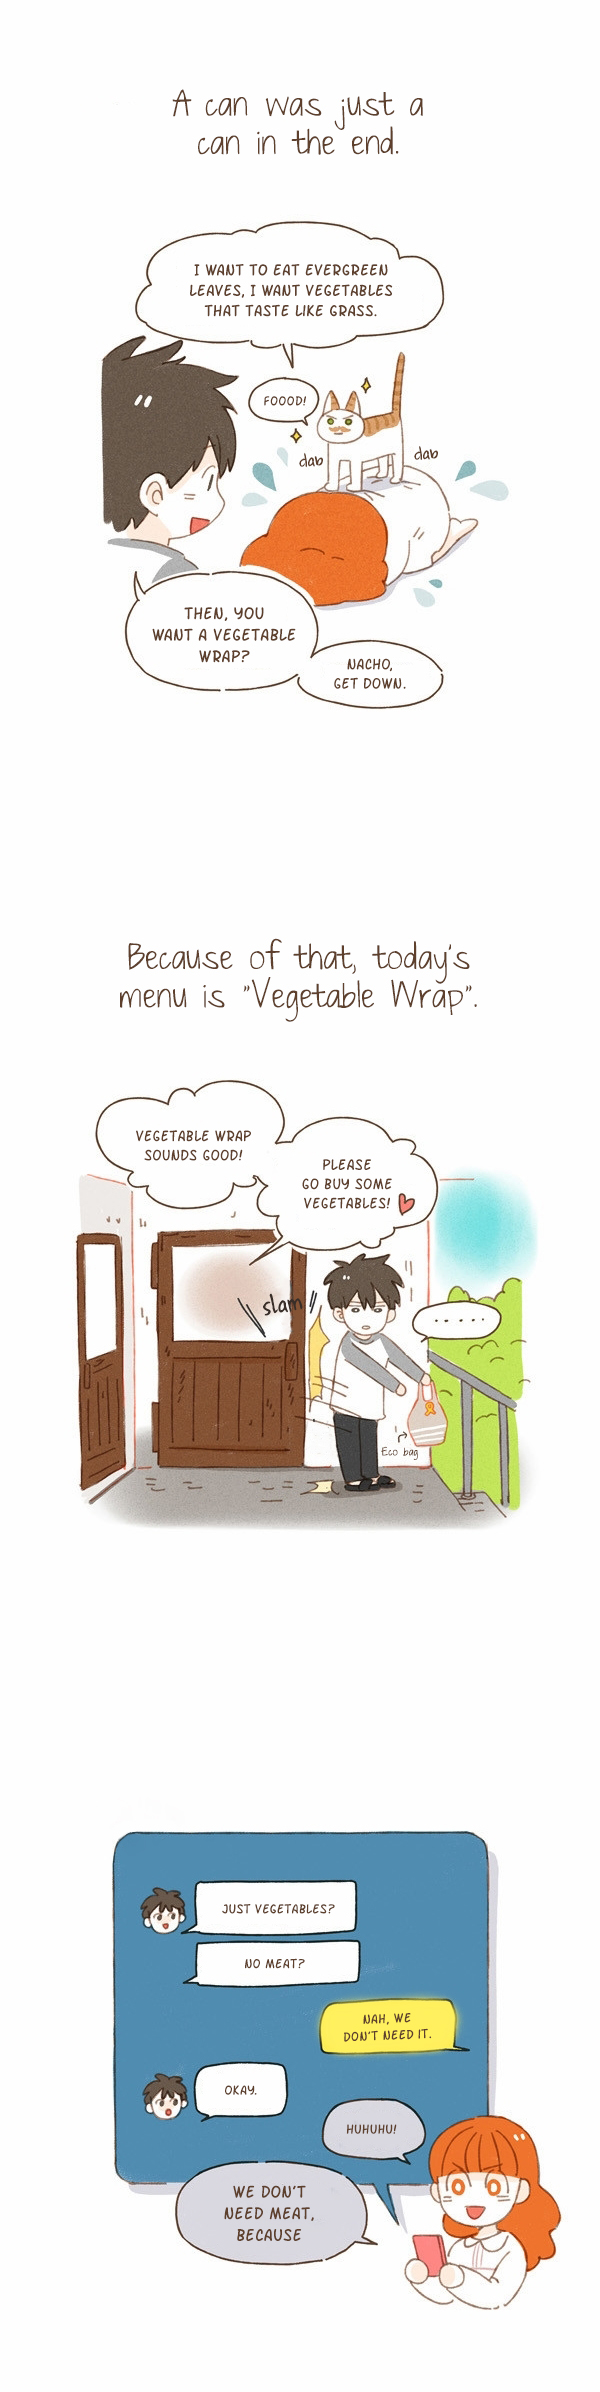 Are You Going to Eat? Ch. 3 Vegetable Stew